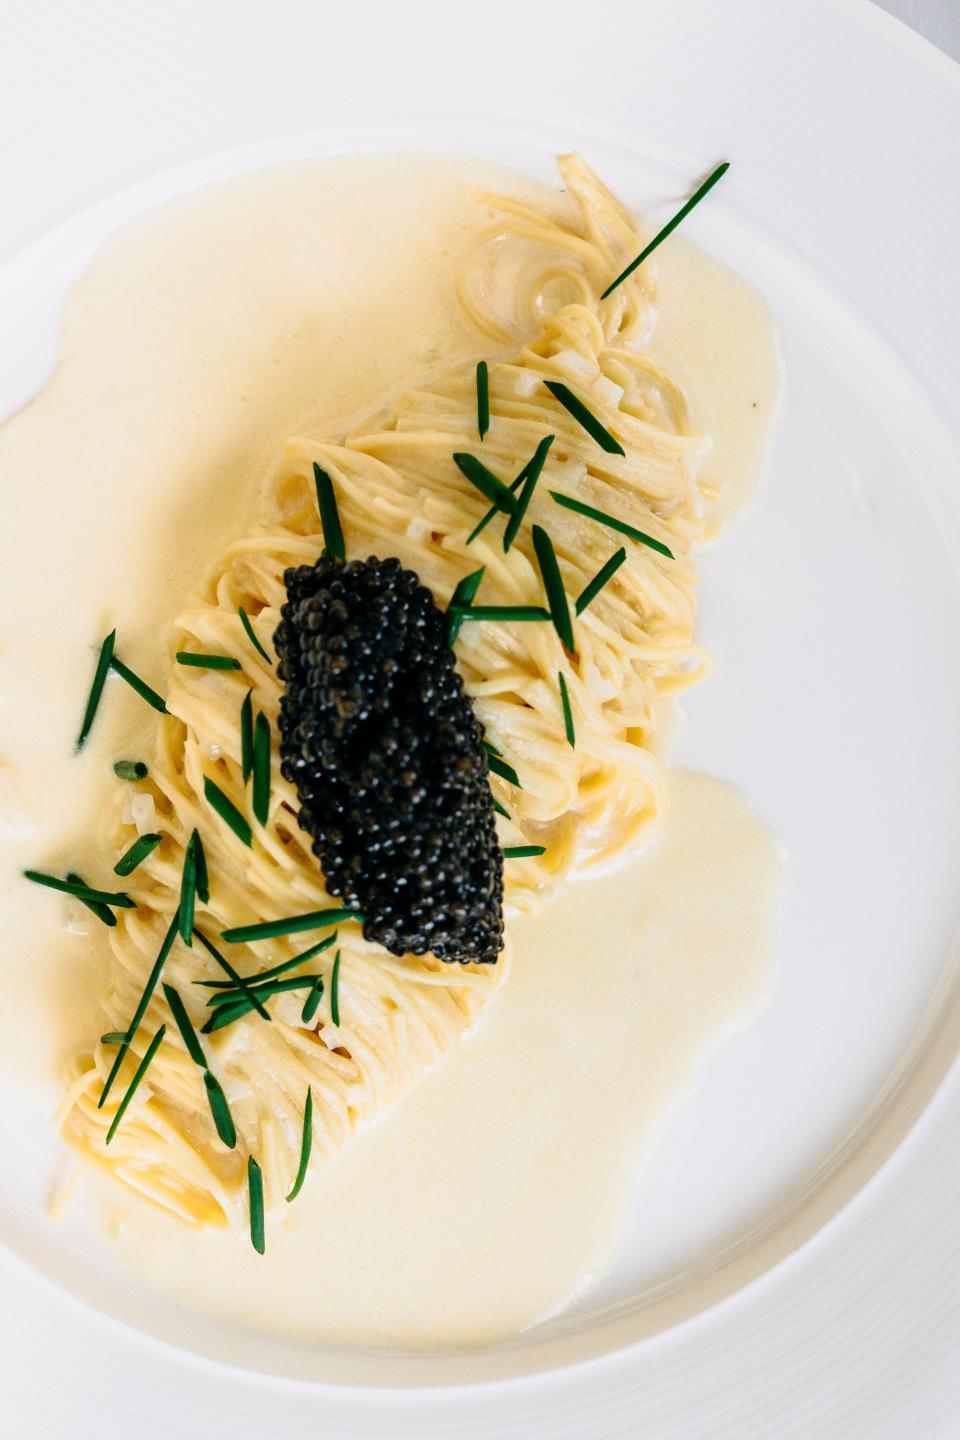 Pasta with caviar at Bacco restaurant in Southfield.